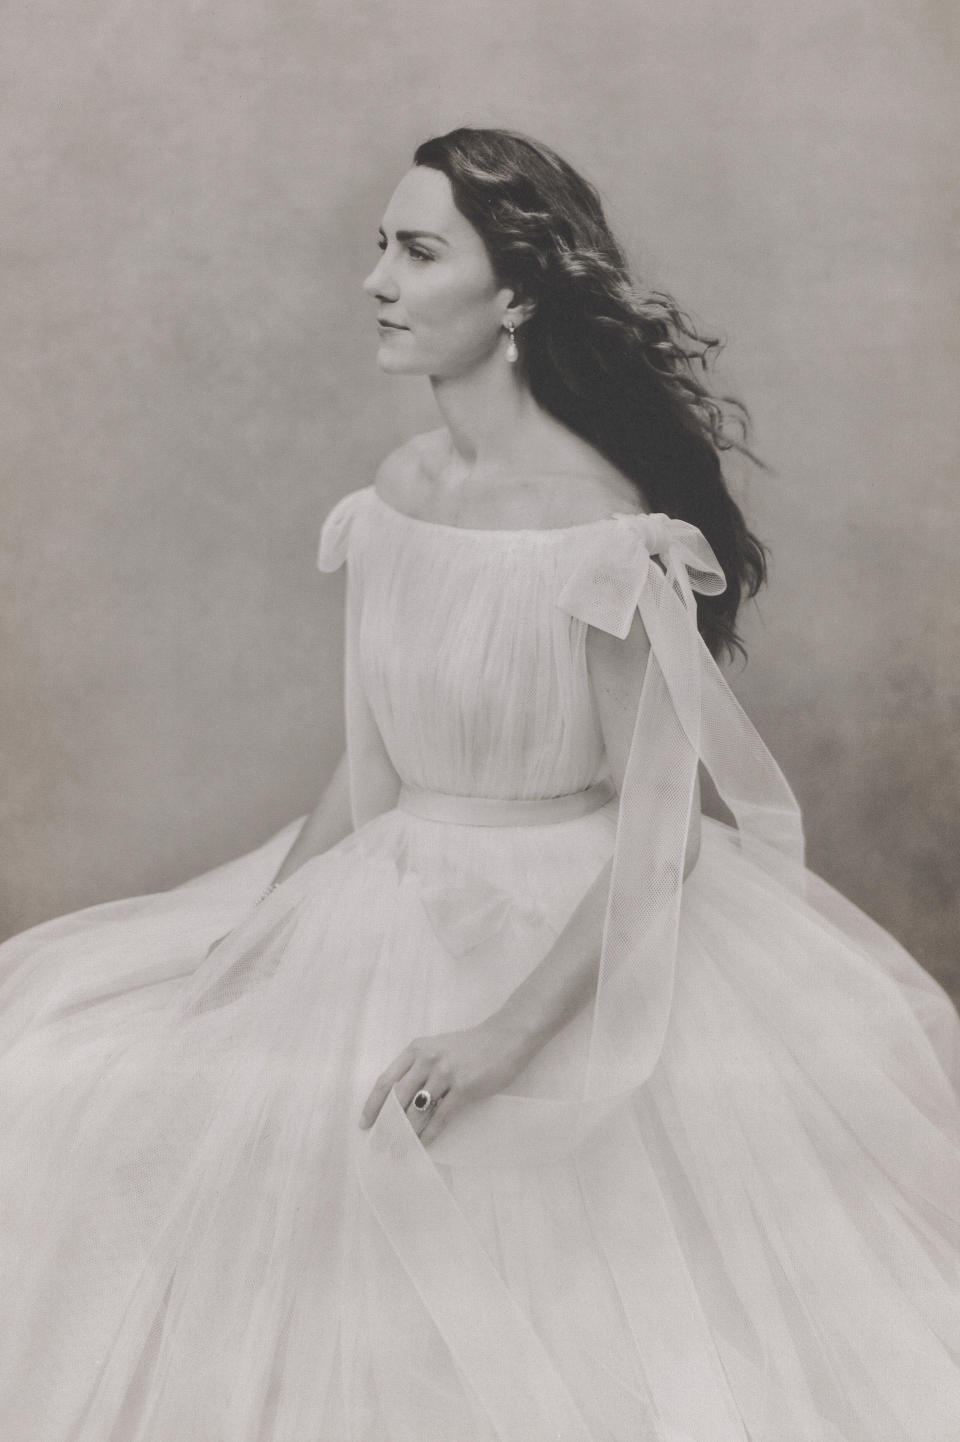 Paolo Roversi, The Princess of Wales, when The Duchess of Cambridge , 2021. Royal Collection Trust / © His Majesty King Charles III 2024.